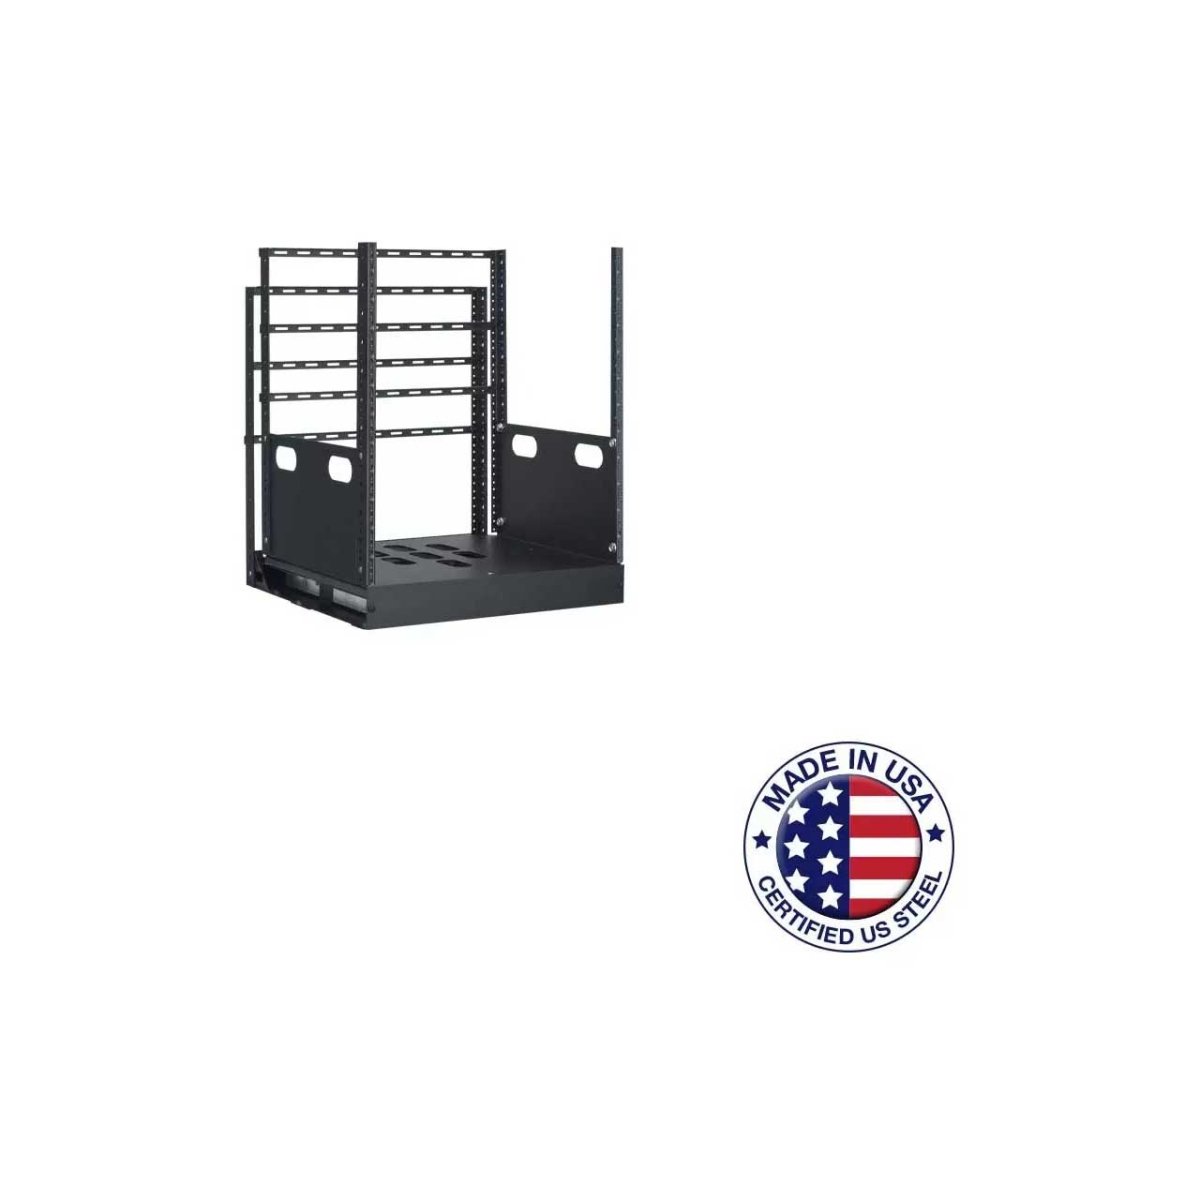 Picture of Lowell Manufacturing LMC-LPTR2-1219 LPTR2-1219 12RU Pull & Turn Millwork Rack with Two Support Rails - 19 in. Deep